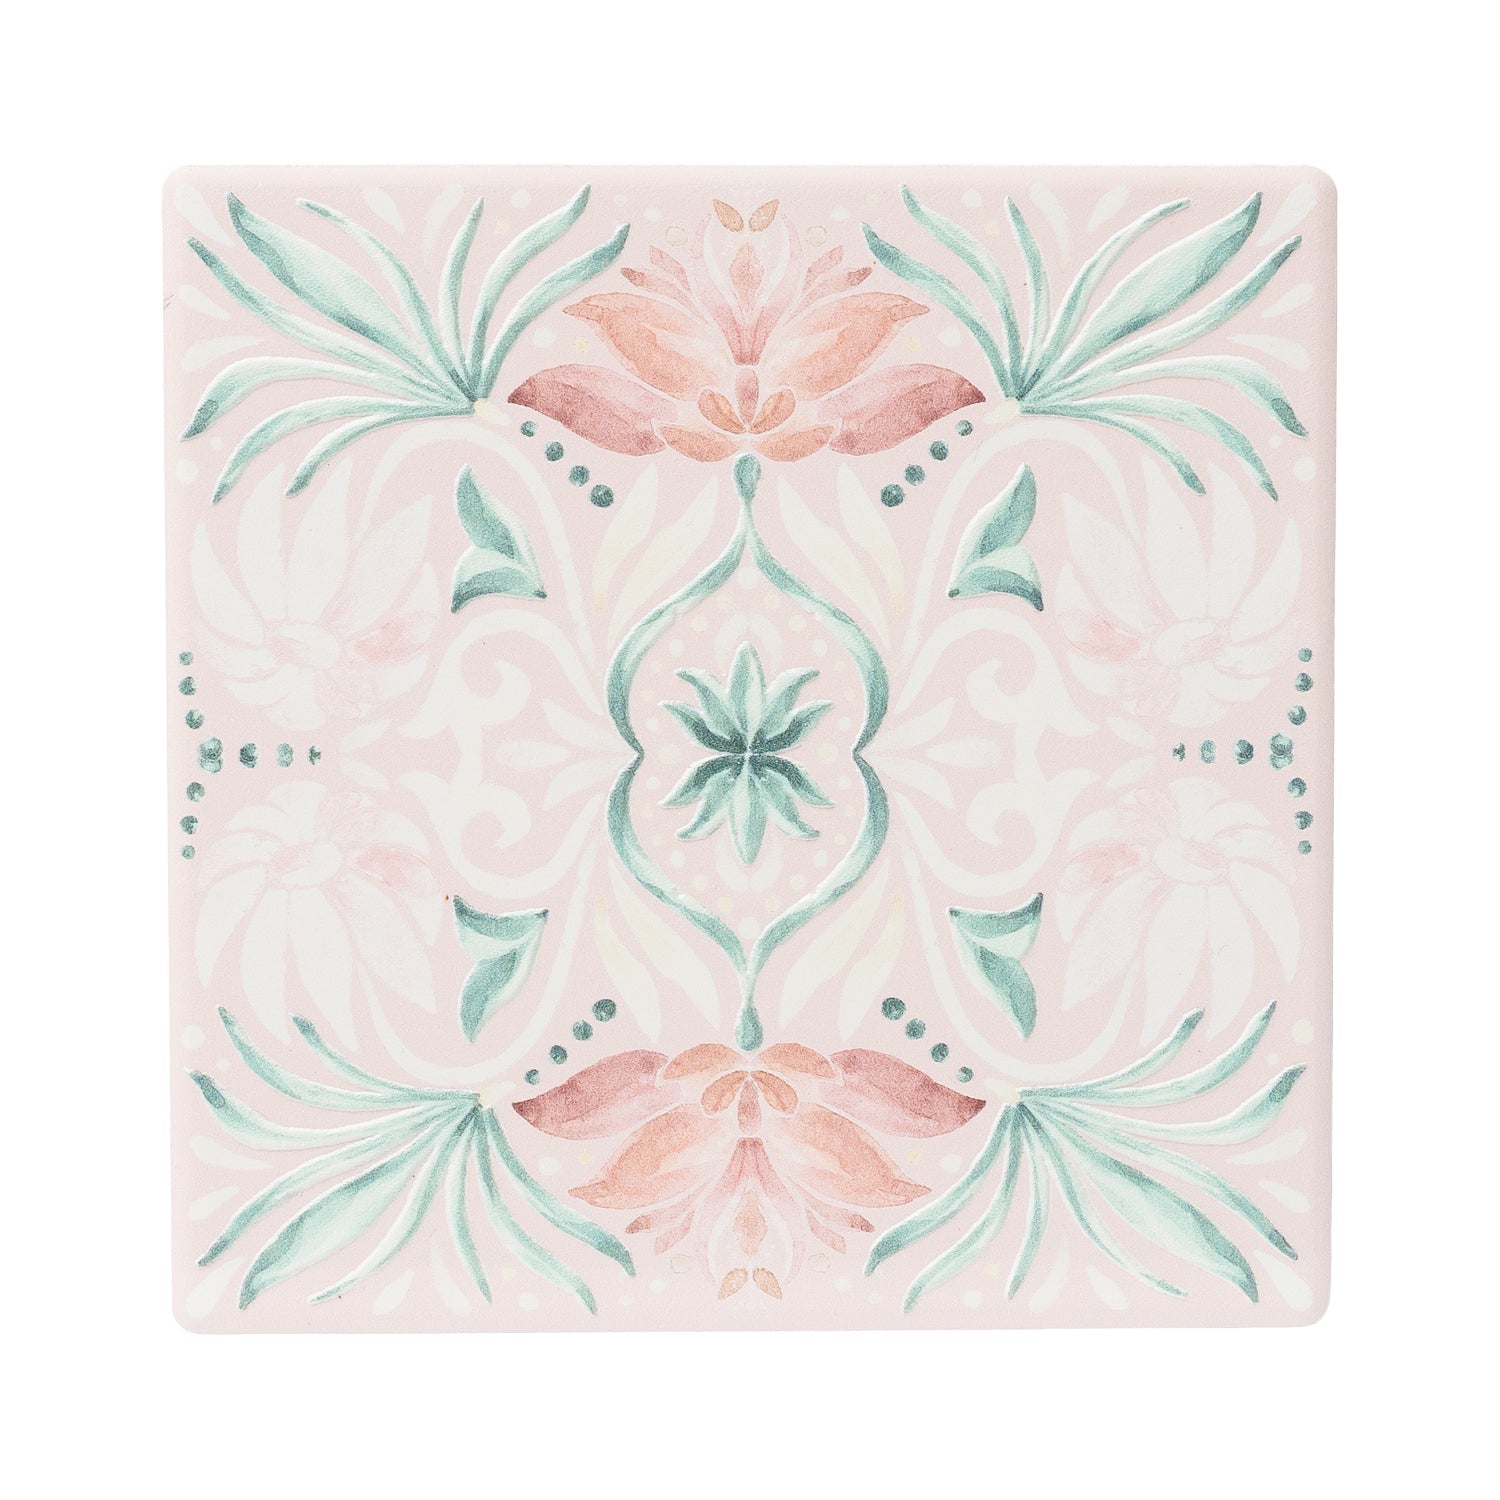 Printed ceramic coaster with embossed pink floral detail and cork backing